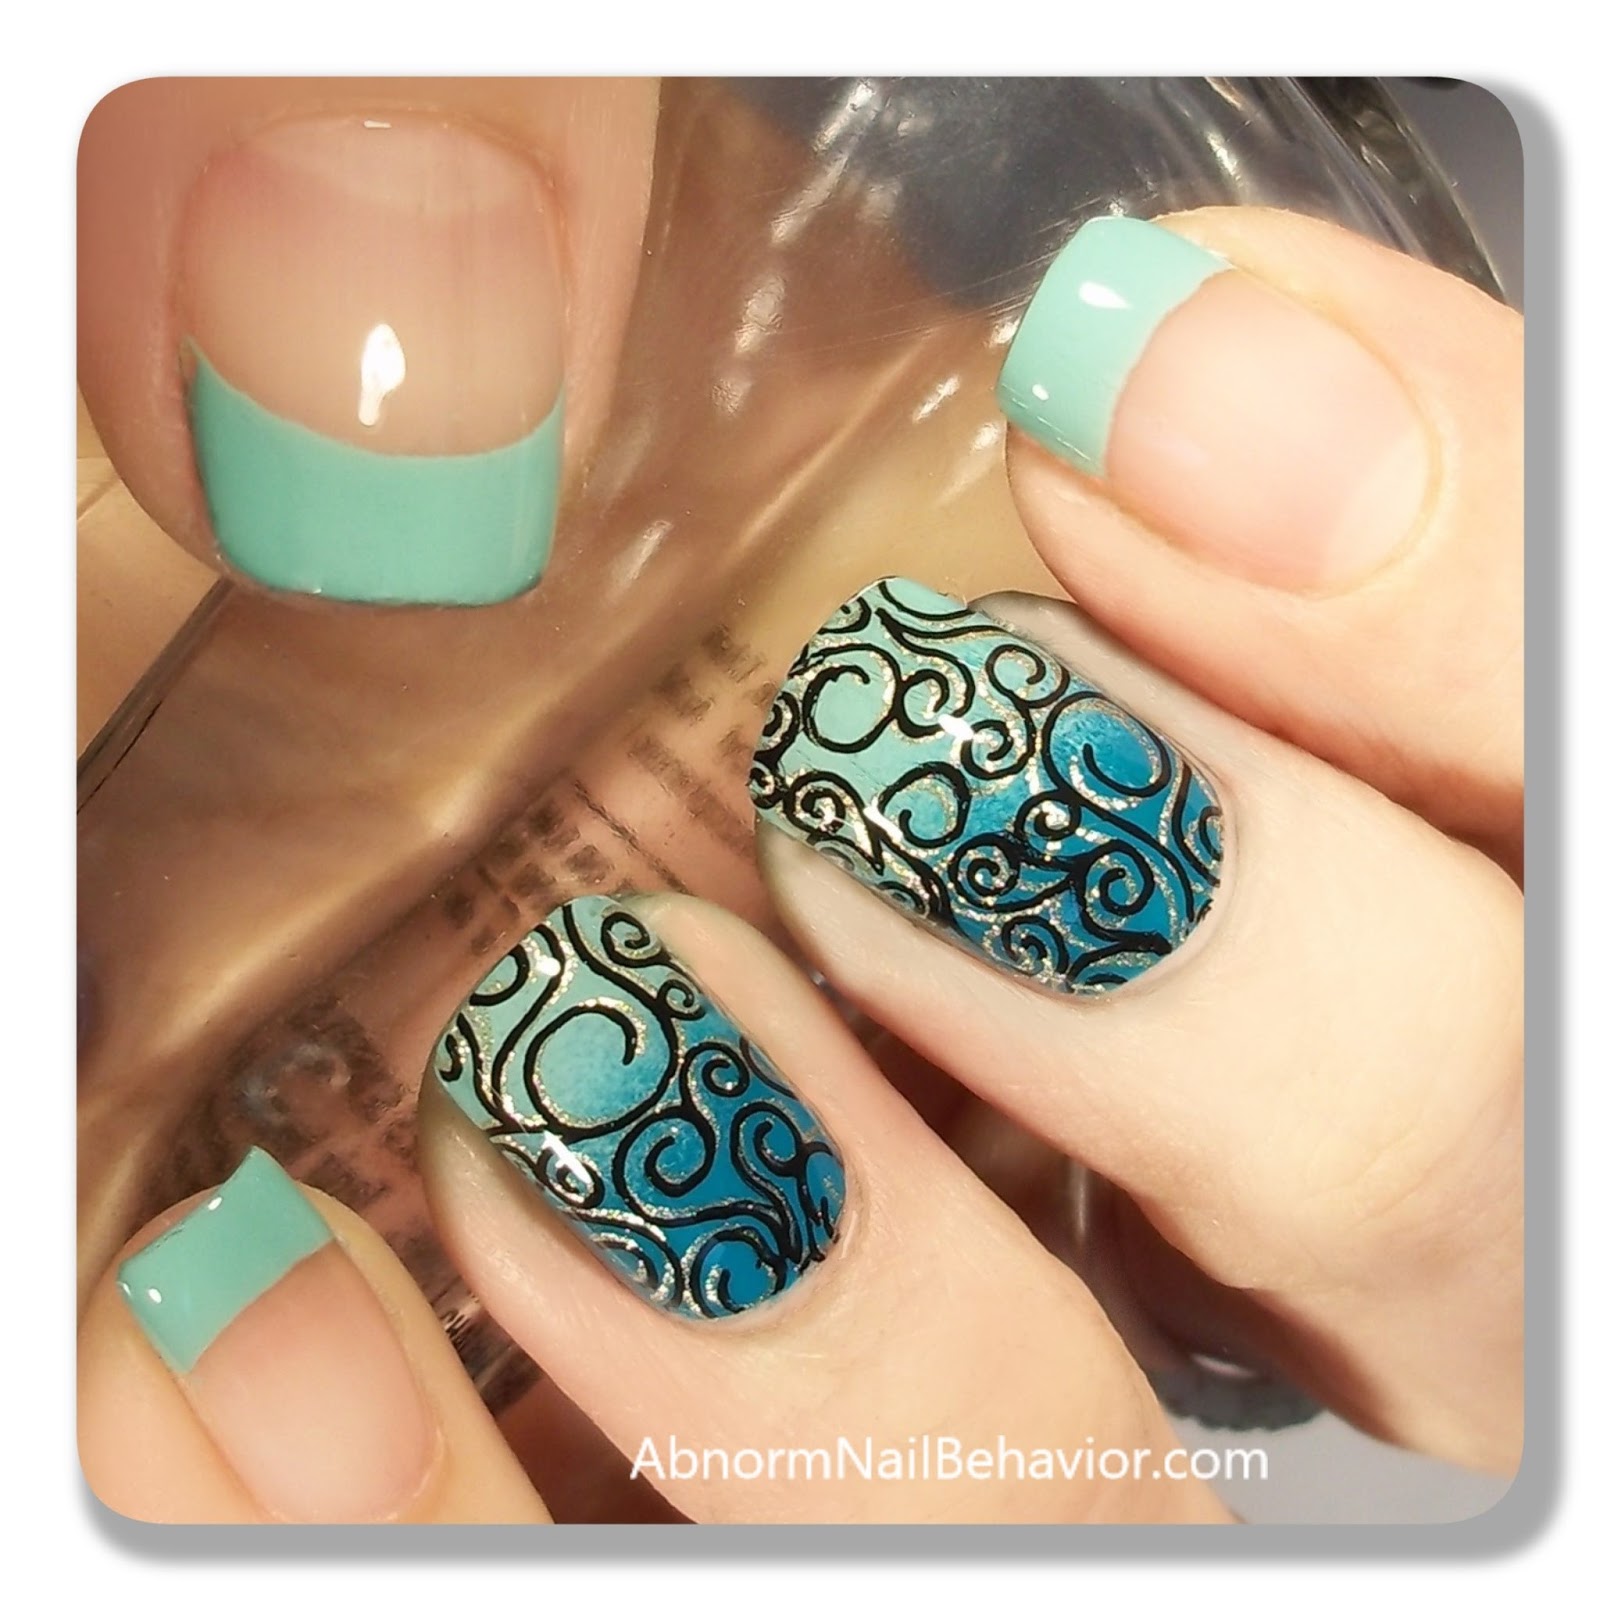 Nailed by Katy P - Boulder Colorado Nail Artist | Turquoise stone nails ❇️  I used @opi_professionals “My Dogsled is a Hybrid” for the base with  streaks in black ink from @cherina... | Instagram